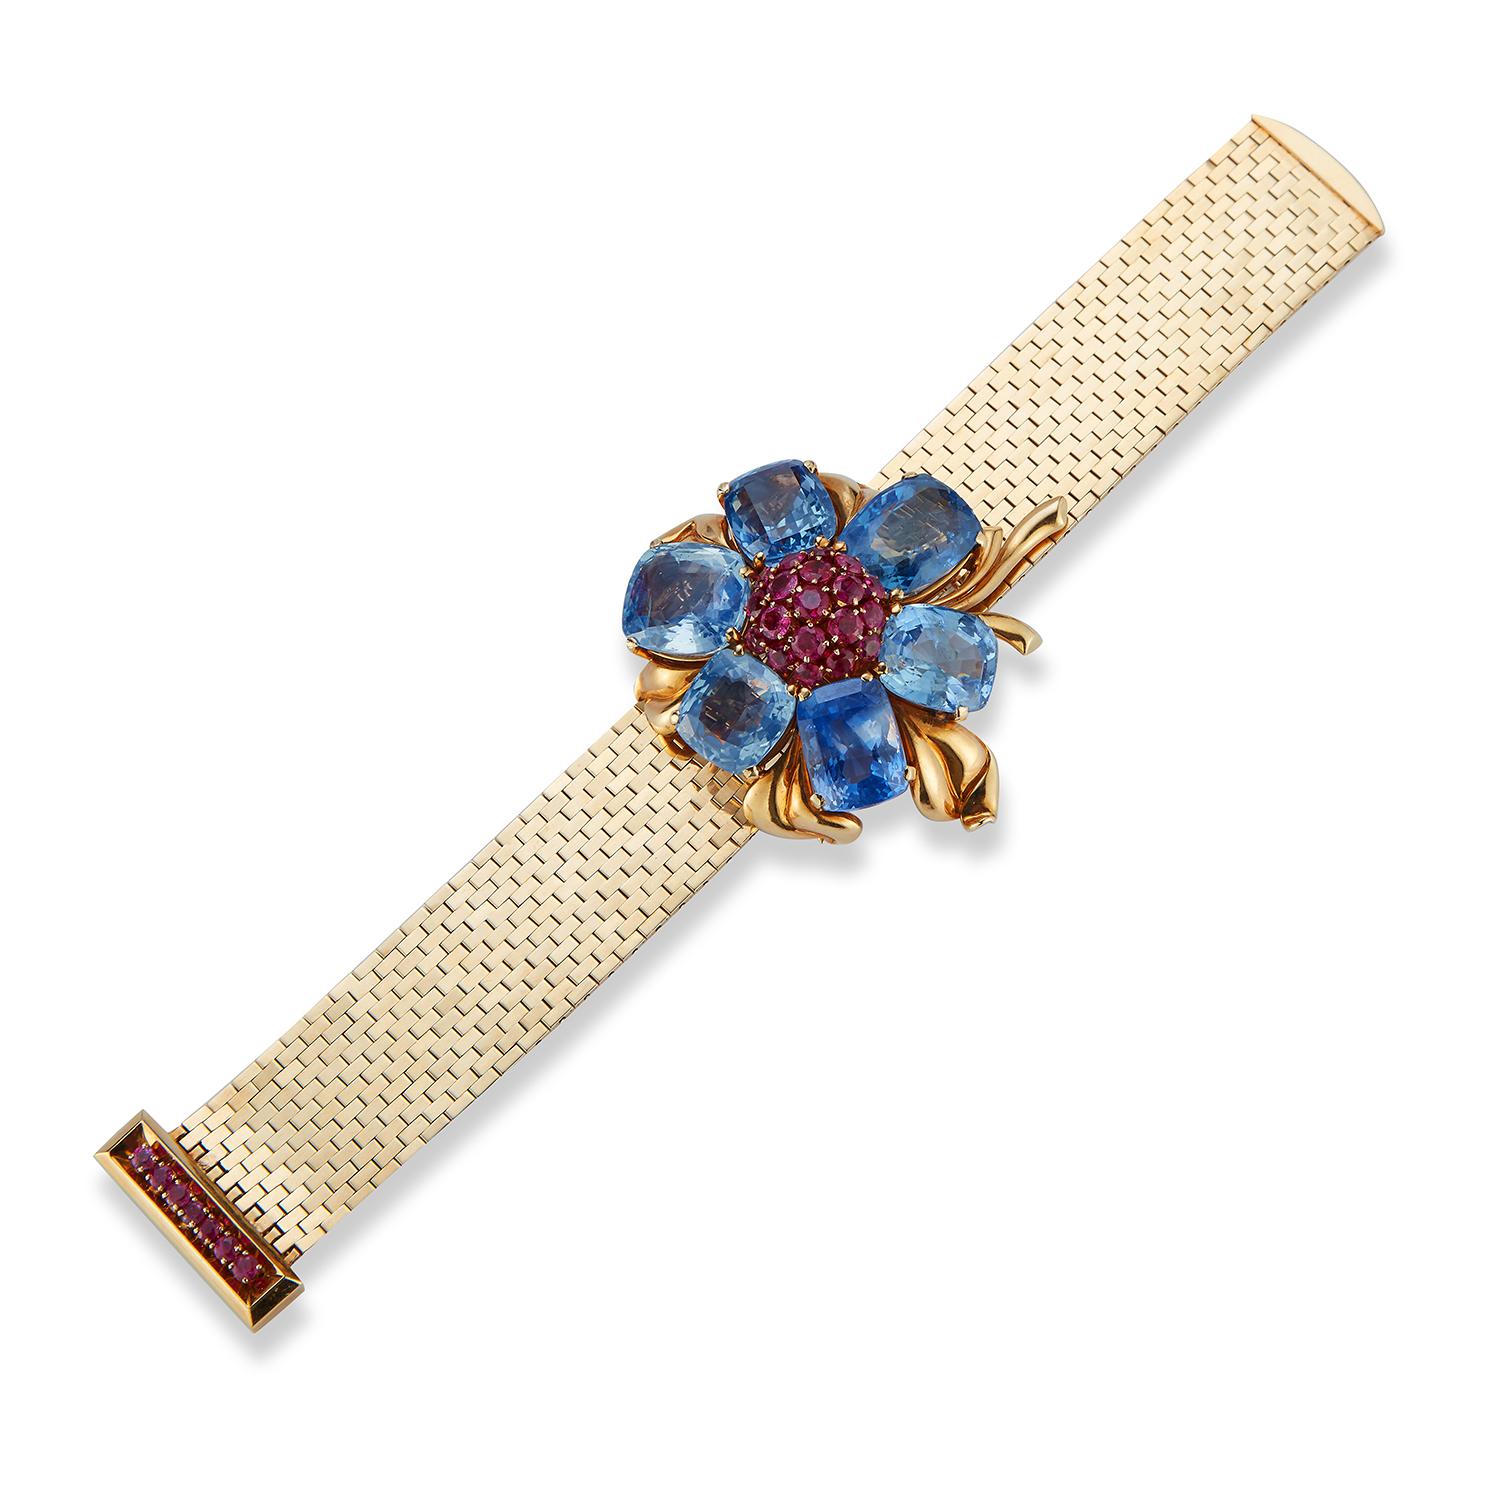 Rare and Iconic Van Cleef & Arpels Passe Partout Sapphire & Ruby Bracelet , 
With a removable  flower brooch. This bracelet can be worn with or without the brooch. 
Six cushion cut sapphires surrounding round cut rubies all set in 18k yellow gold 